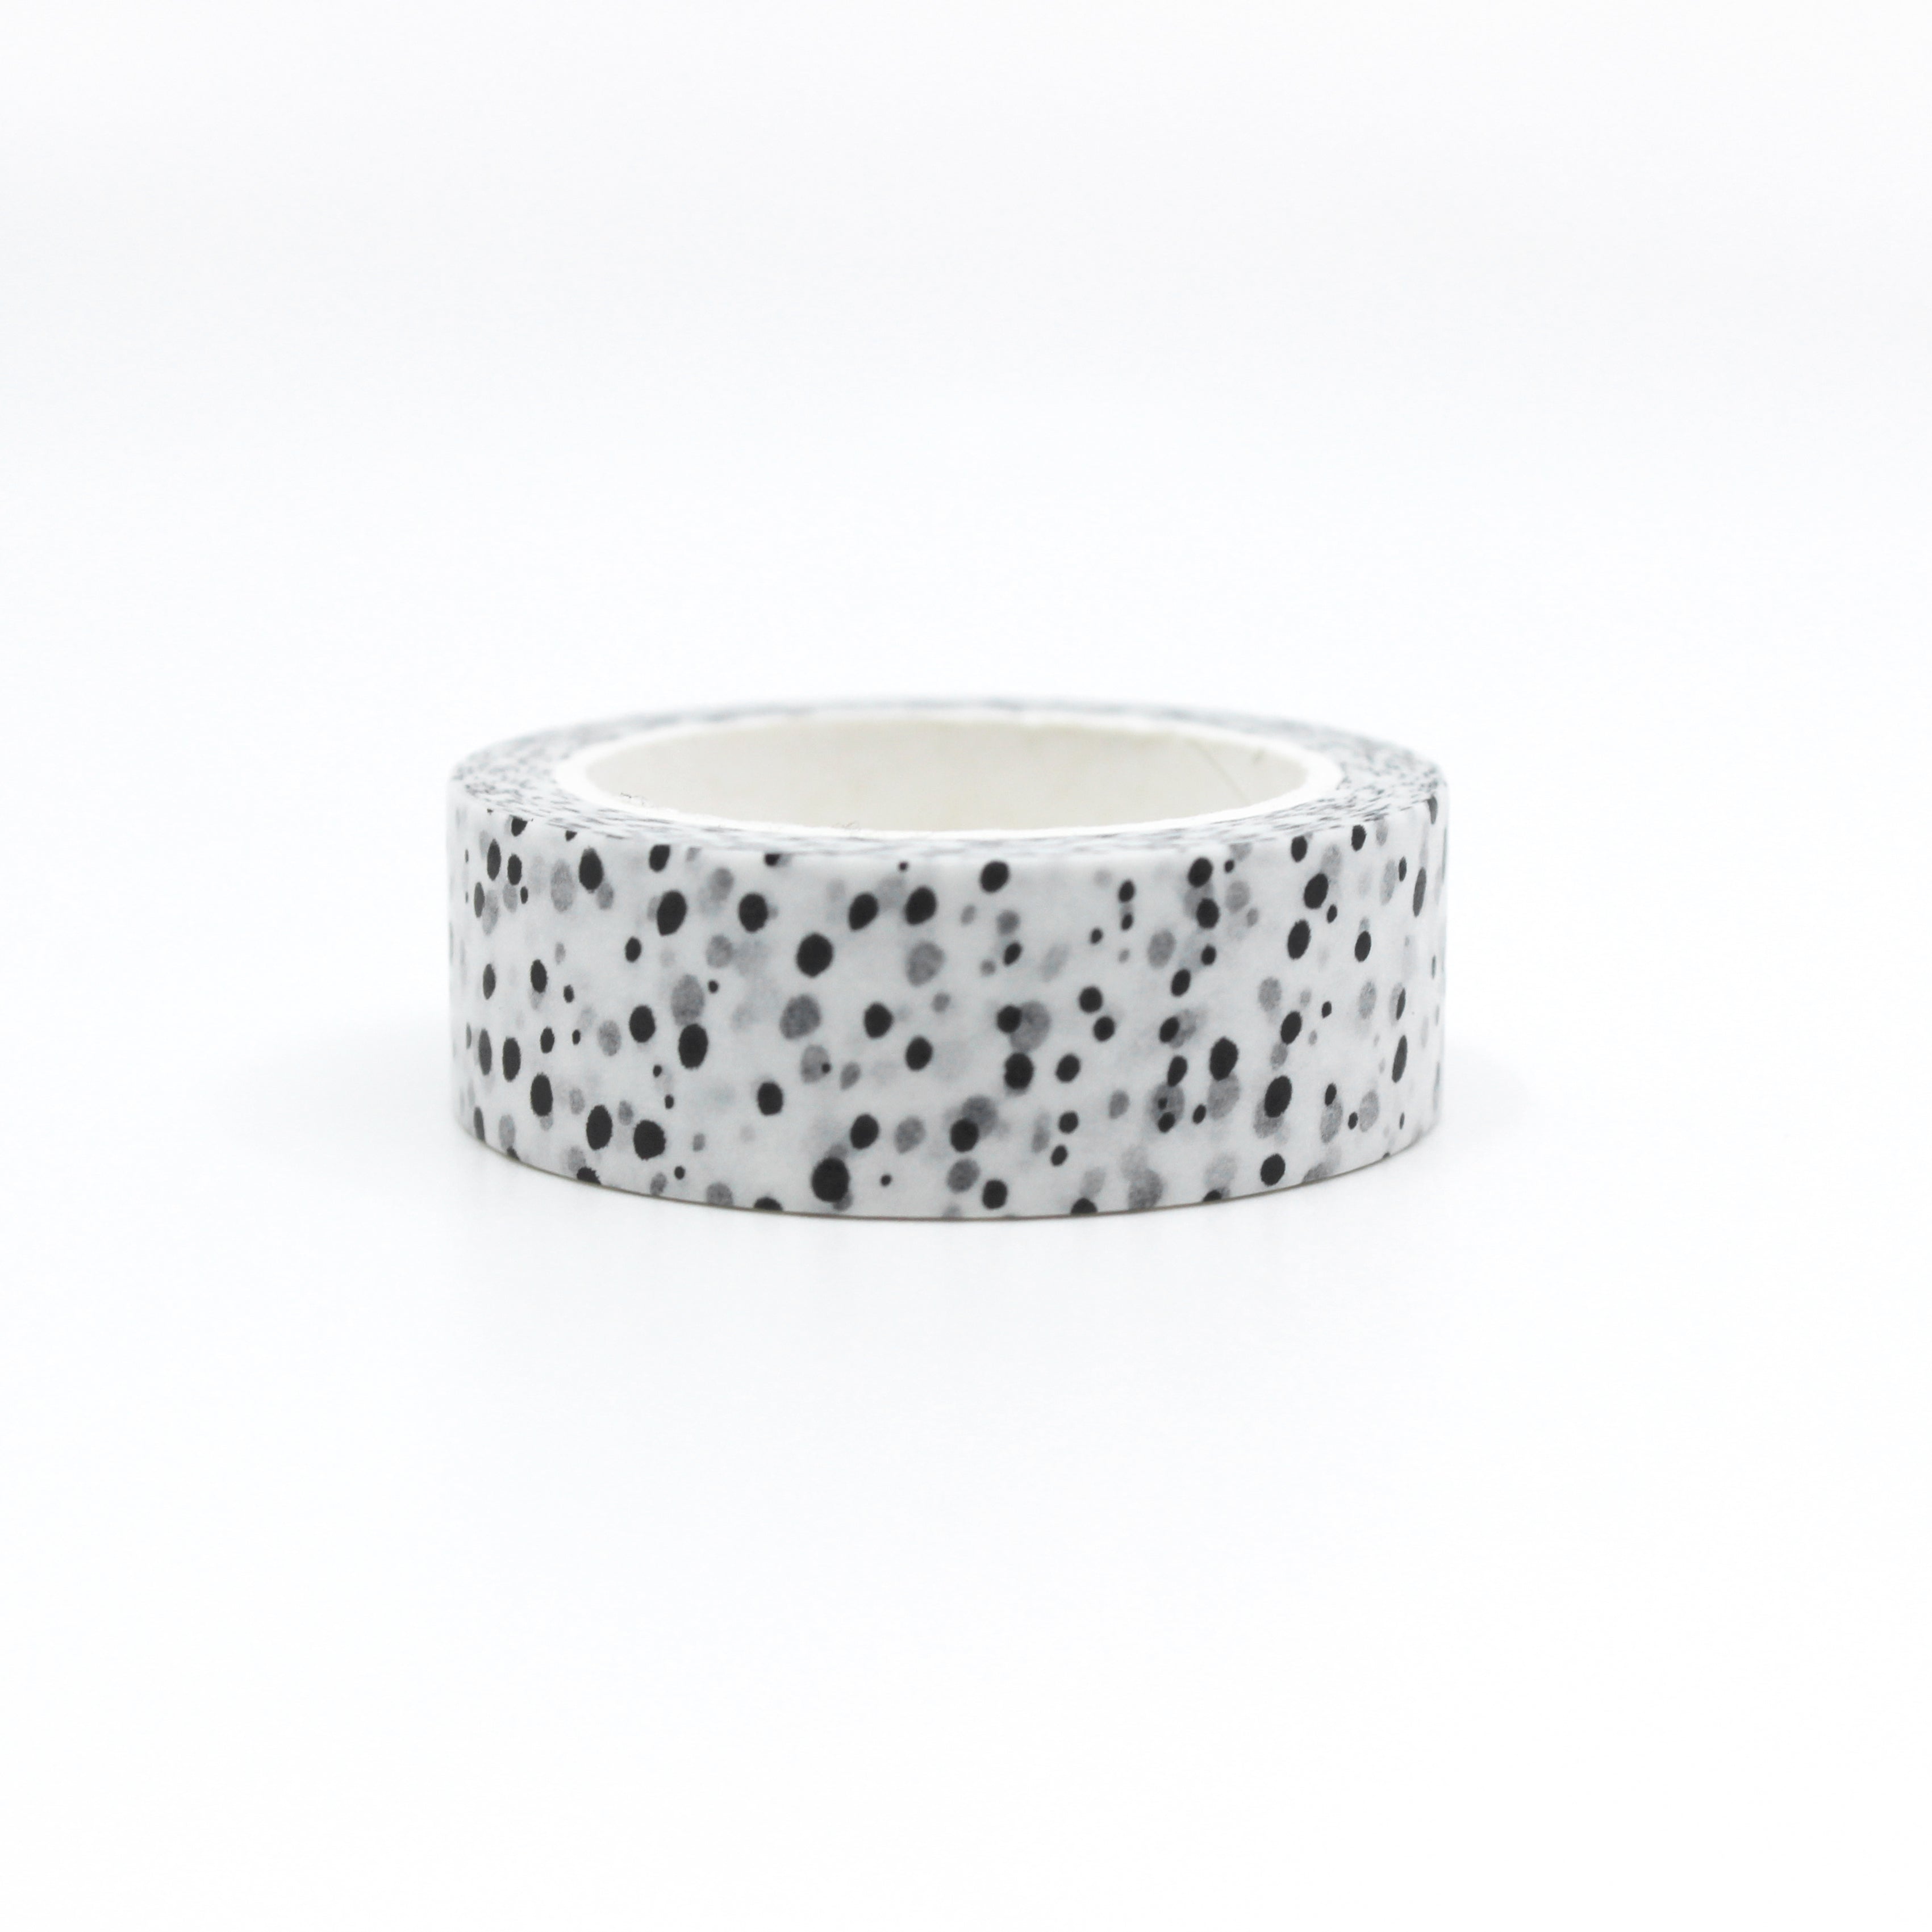 This is a tiny random dots black and white washi tape from BBB Supplies Craft Shop